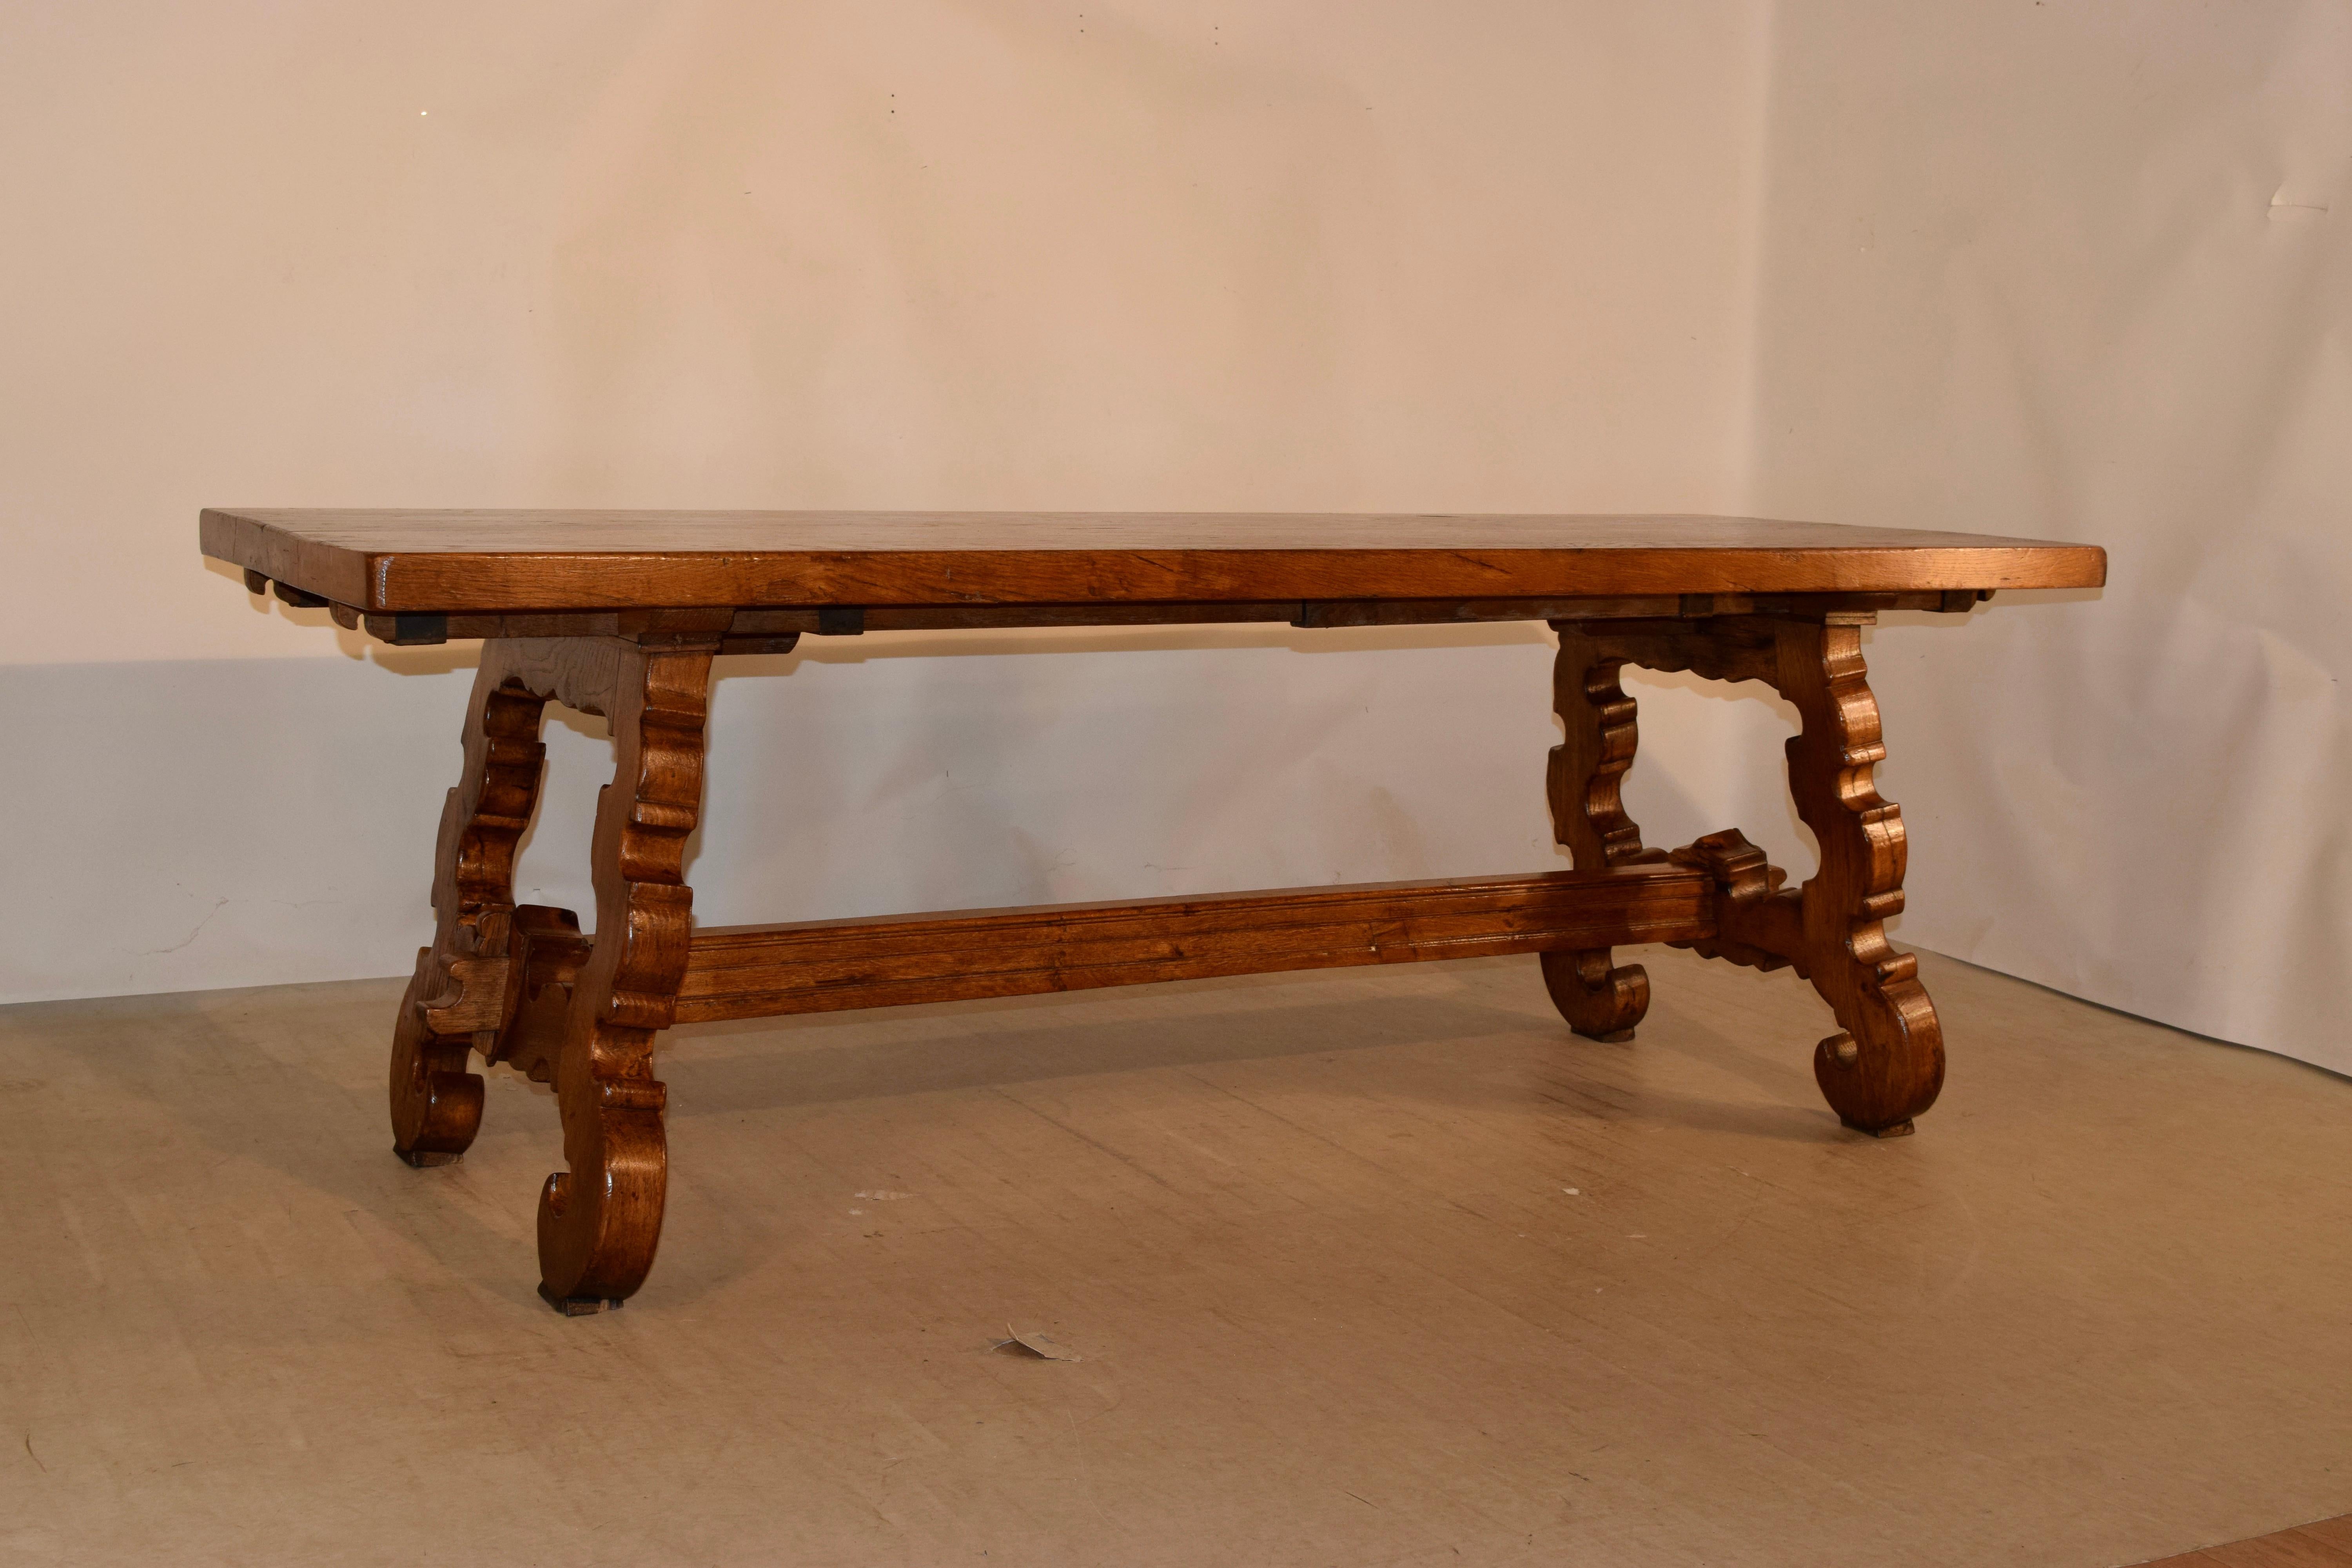 19th century Spanish oak table with a thick plank top which is 2.13 inches supported on splayed legs, which are wonderfully shaped and scalloped and joined by a shaped stretcher.